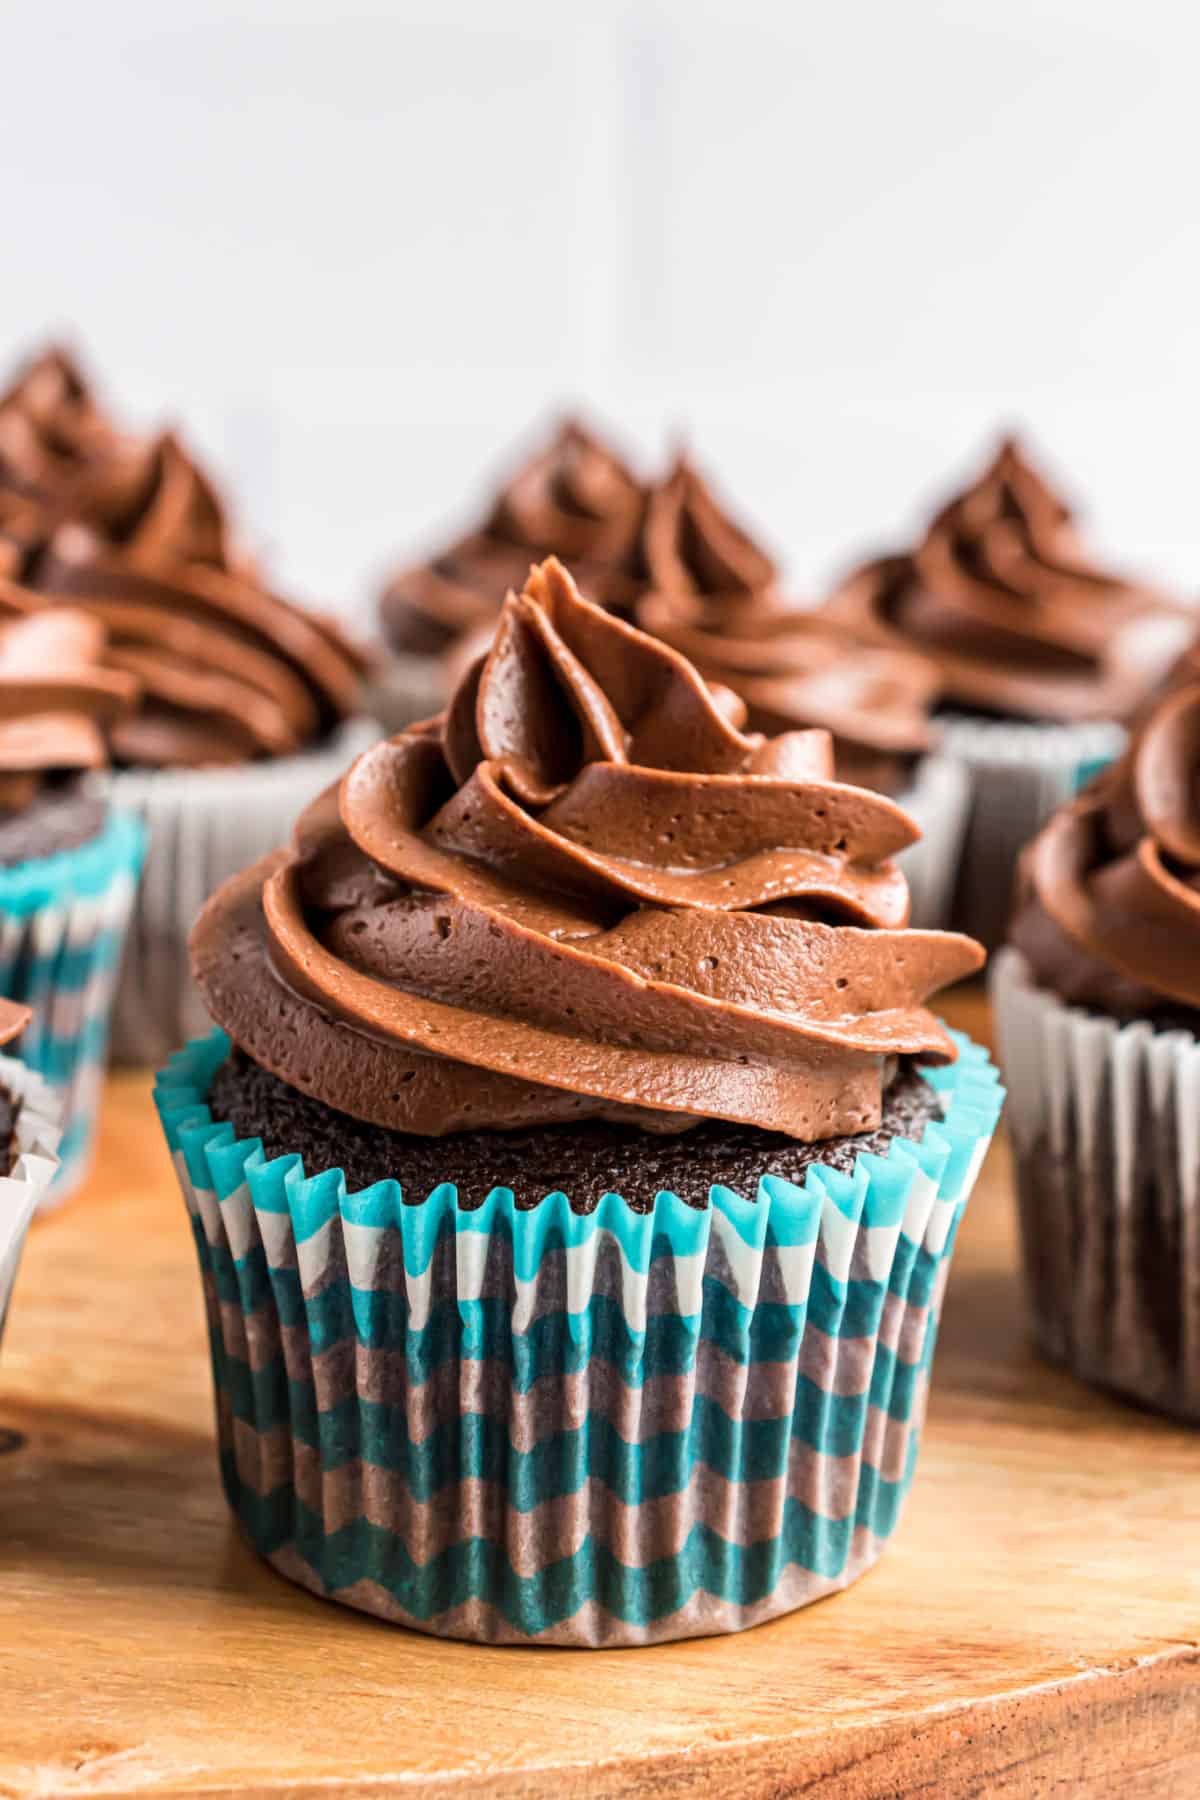 Chocolate cupcakes topped with swirls of chocolate frosting.